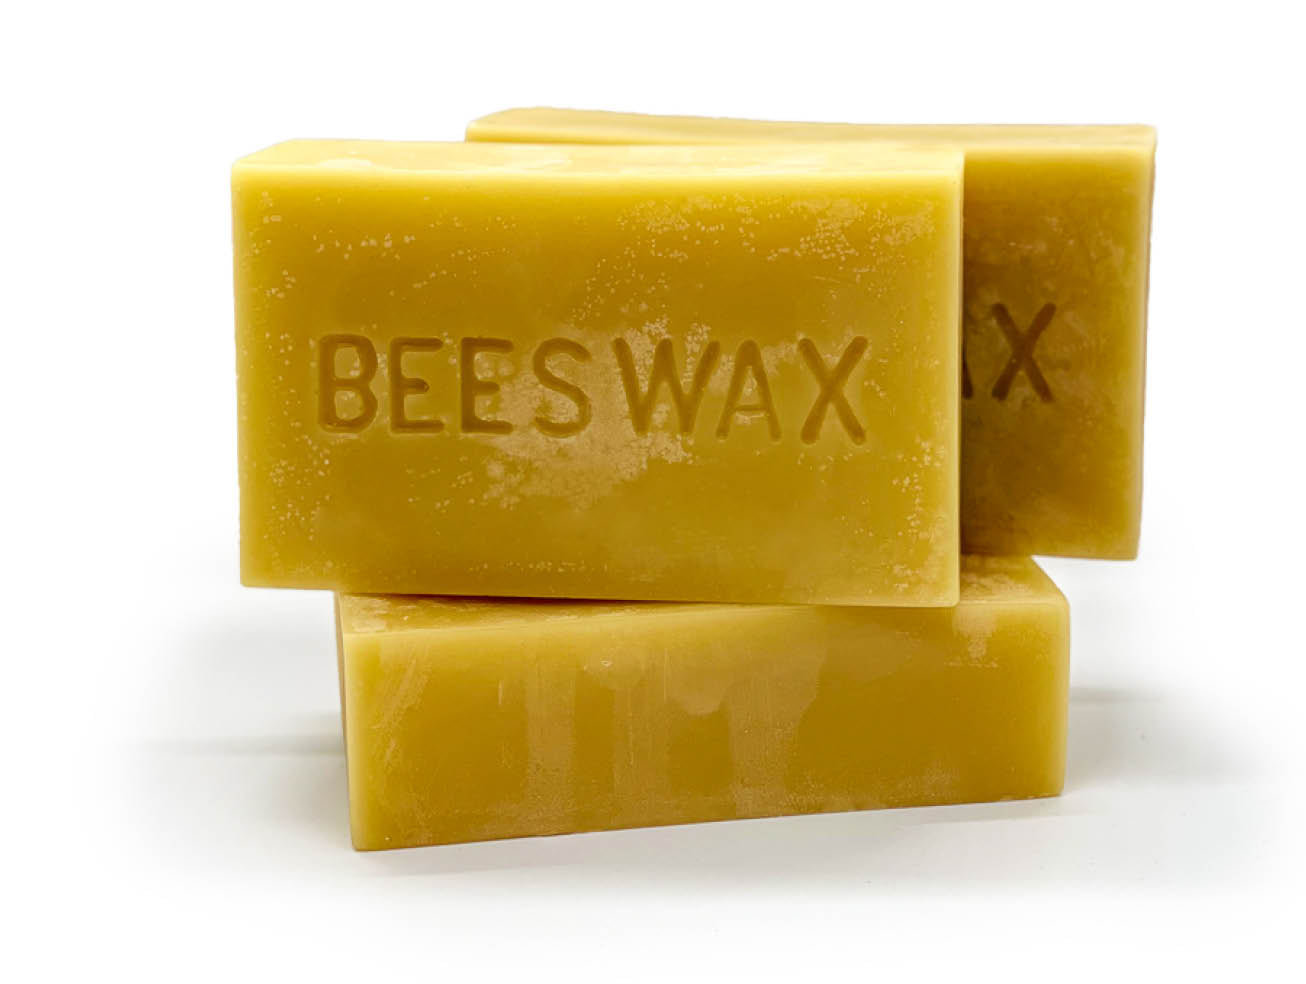 Beeswax Bar, Filtered (100% Pure) 1 lb.